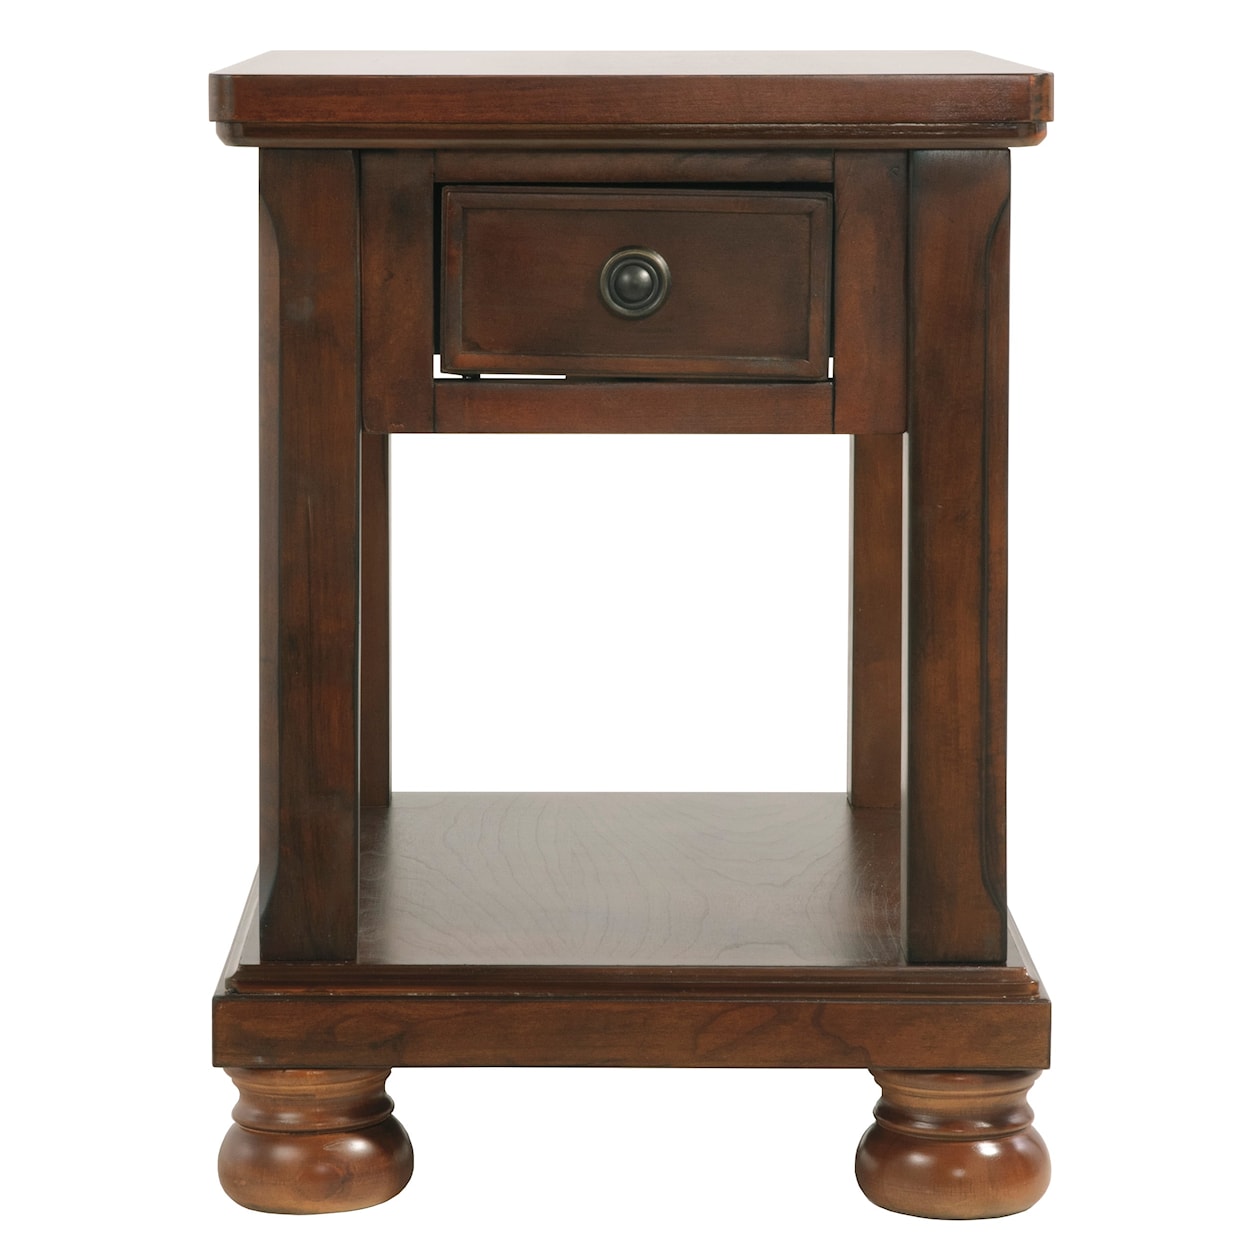 Signature Design by Ashley Porter Chairside End Table